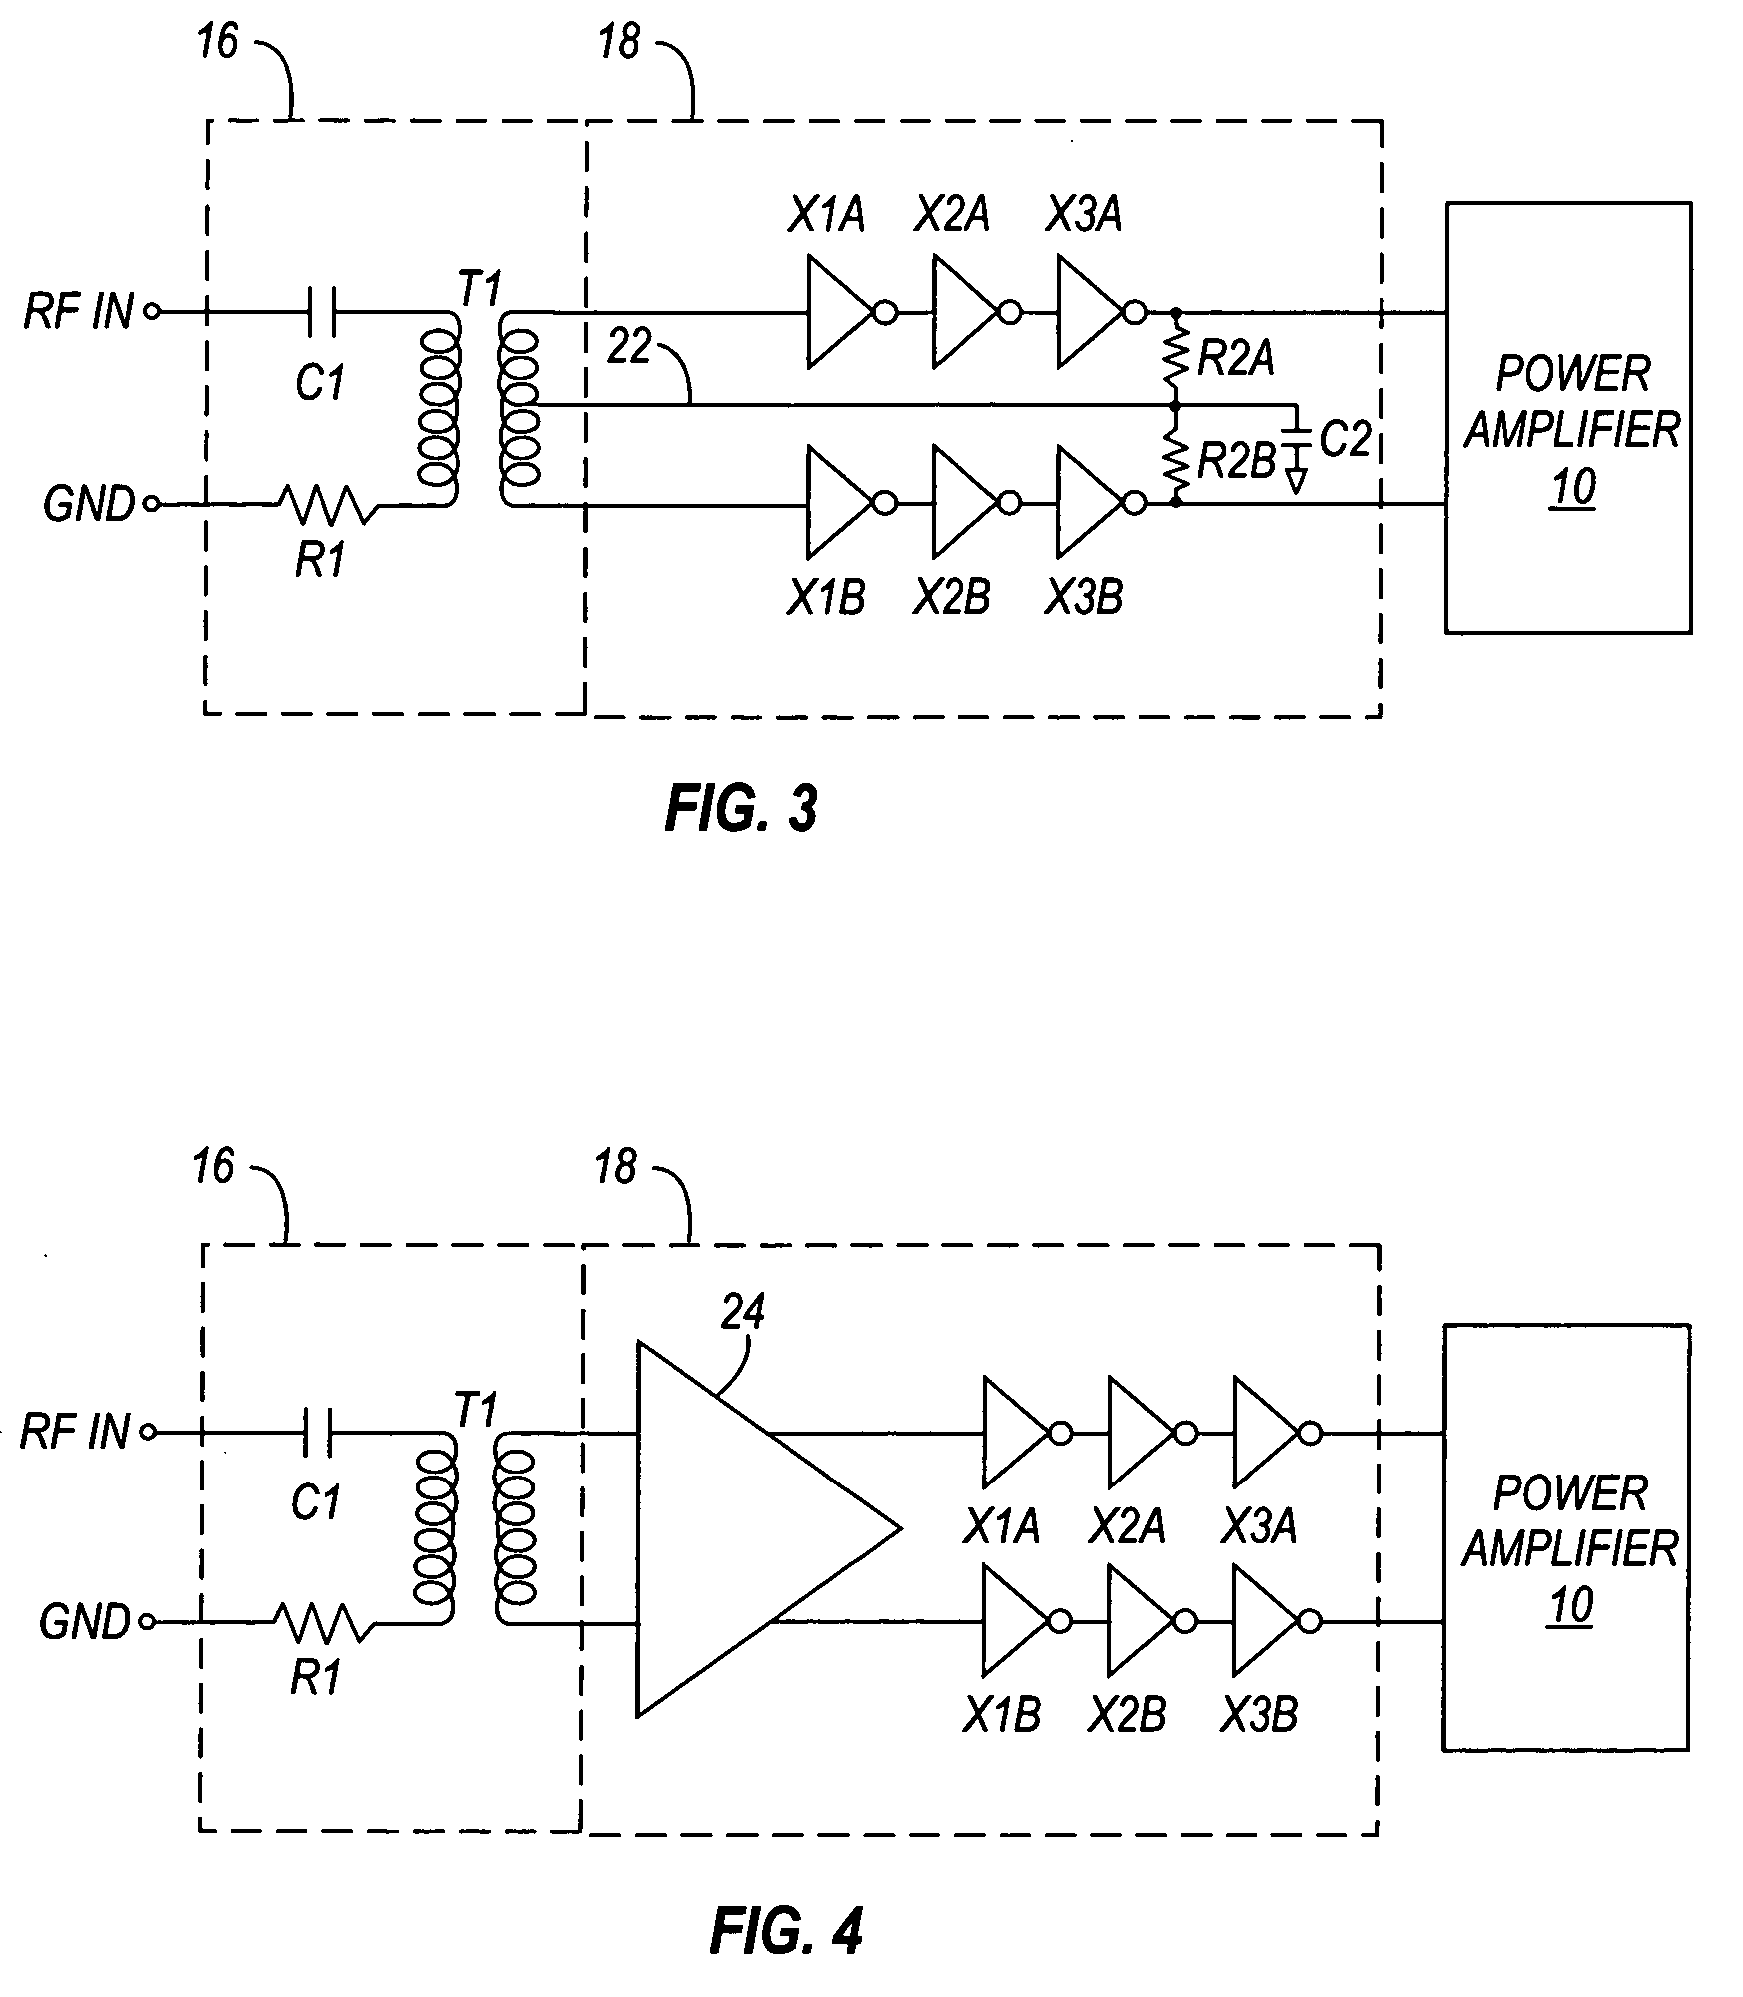 Power amplifier input structure having a differential output